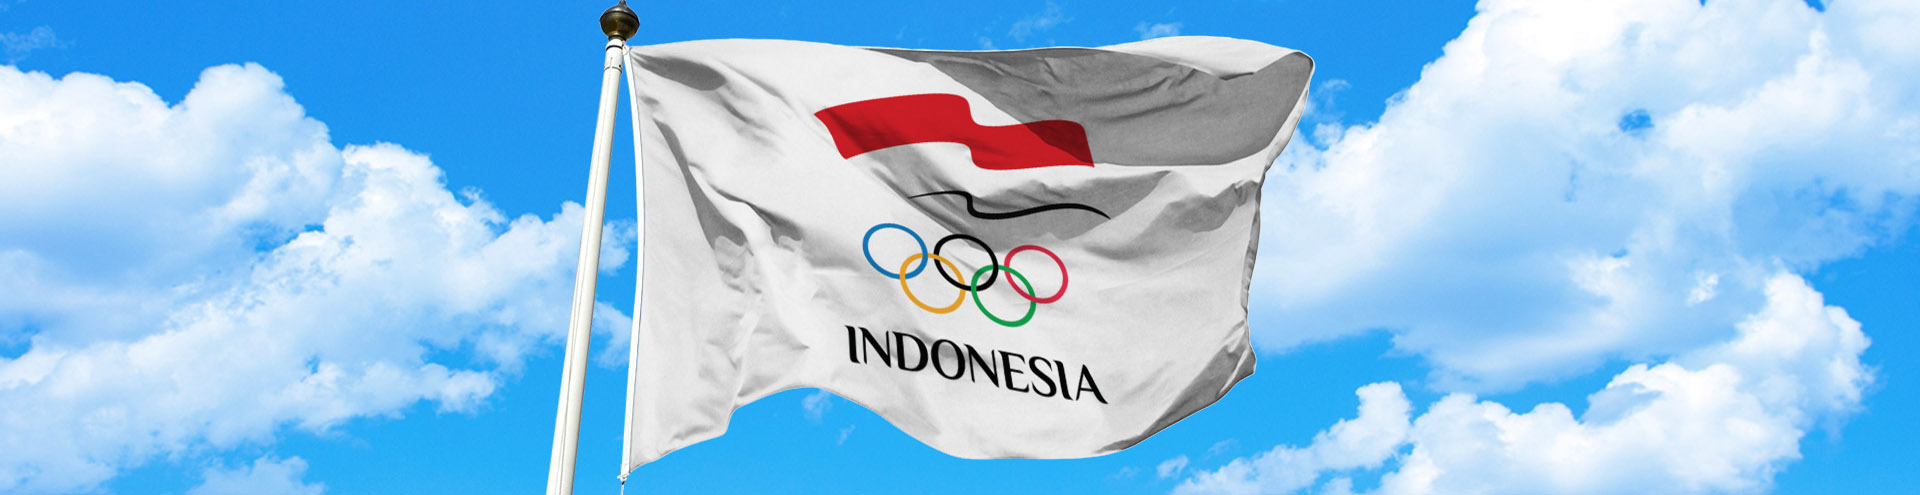 Indonesia Olympic Commitee - IOC Confirms Citra Febrianti's London 2012 Medal